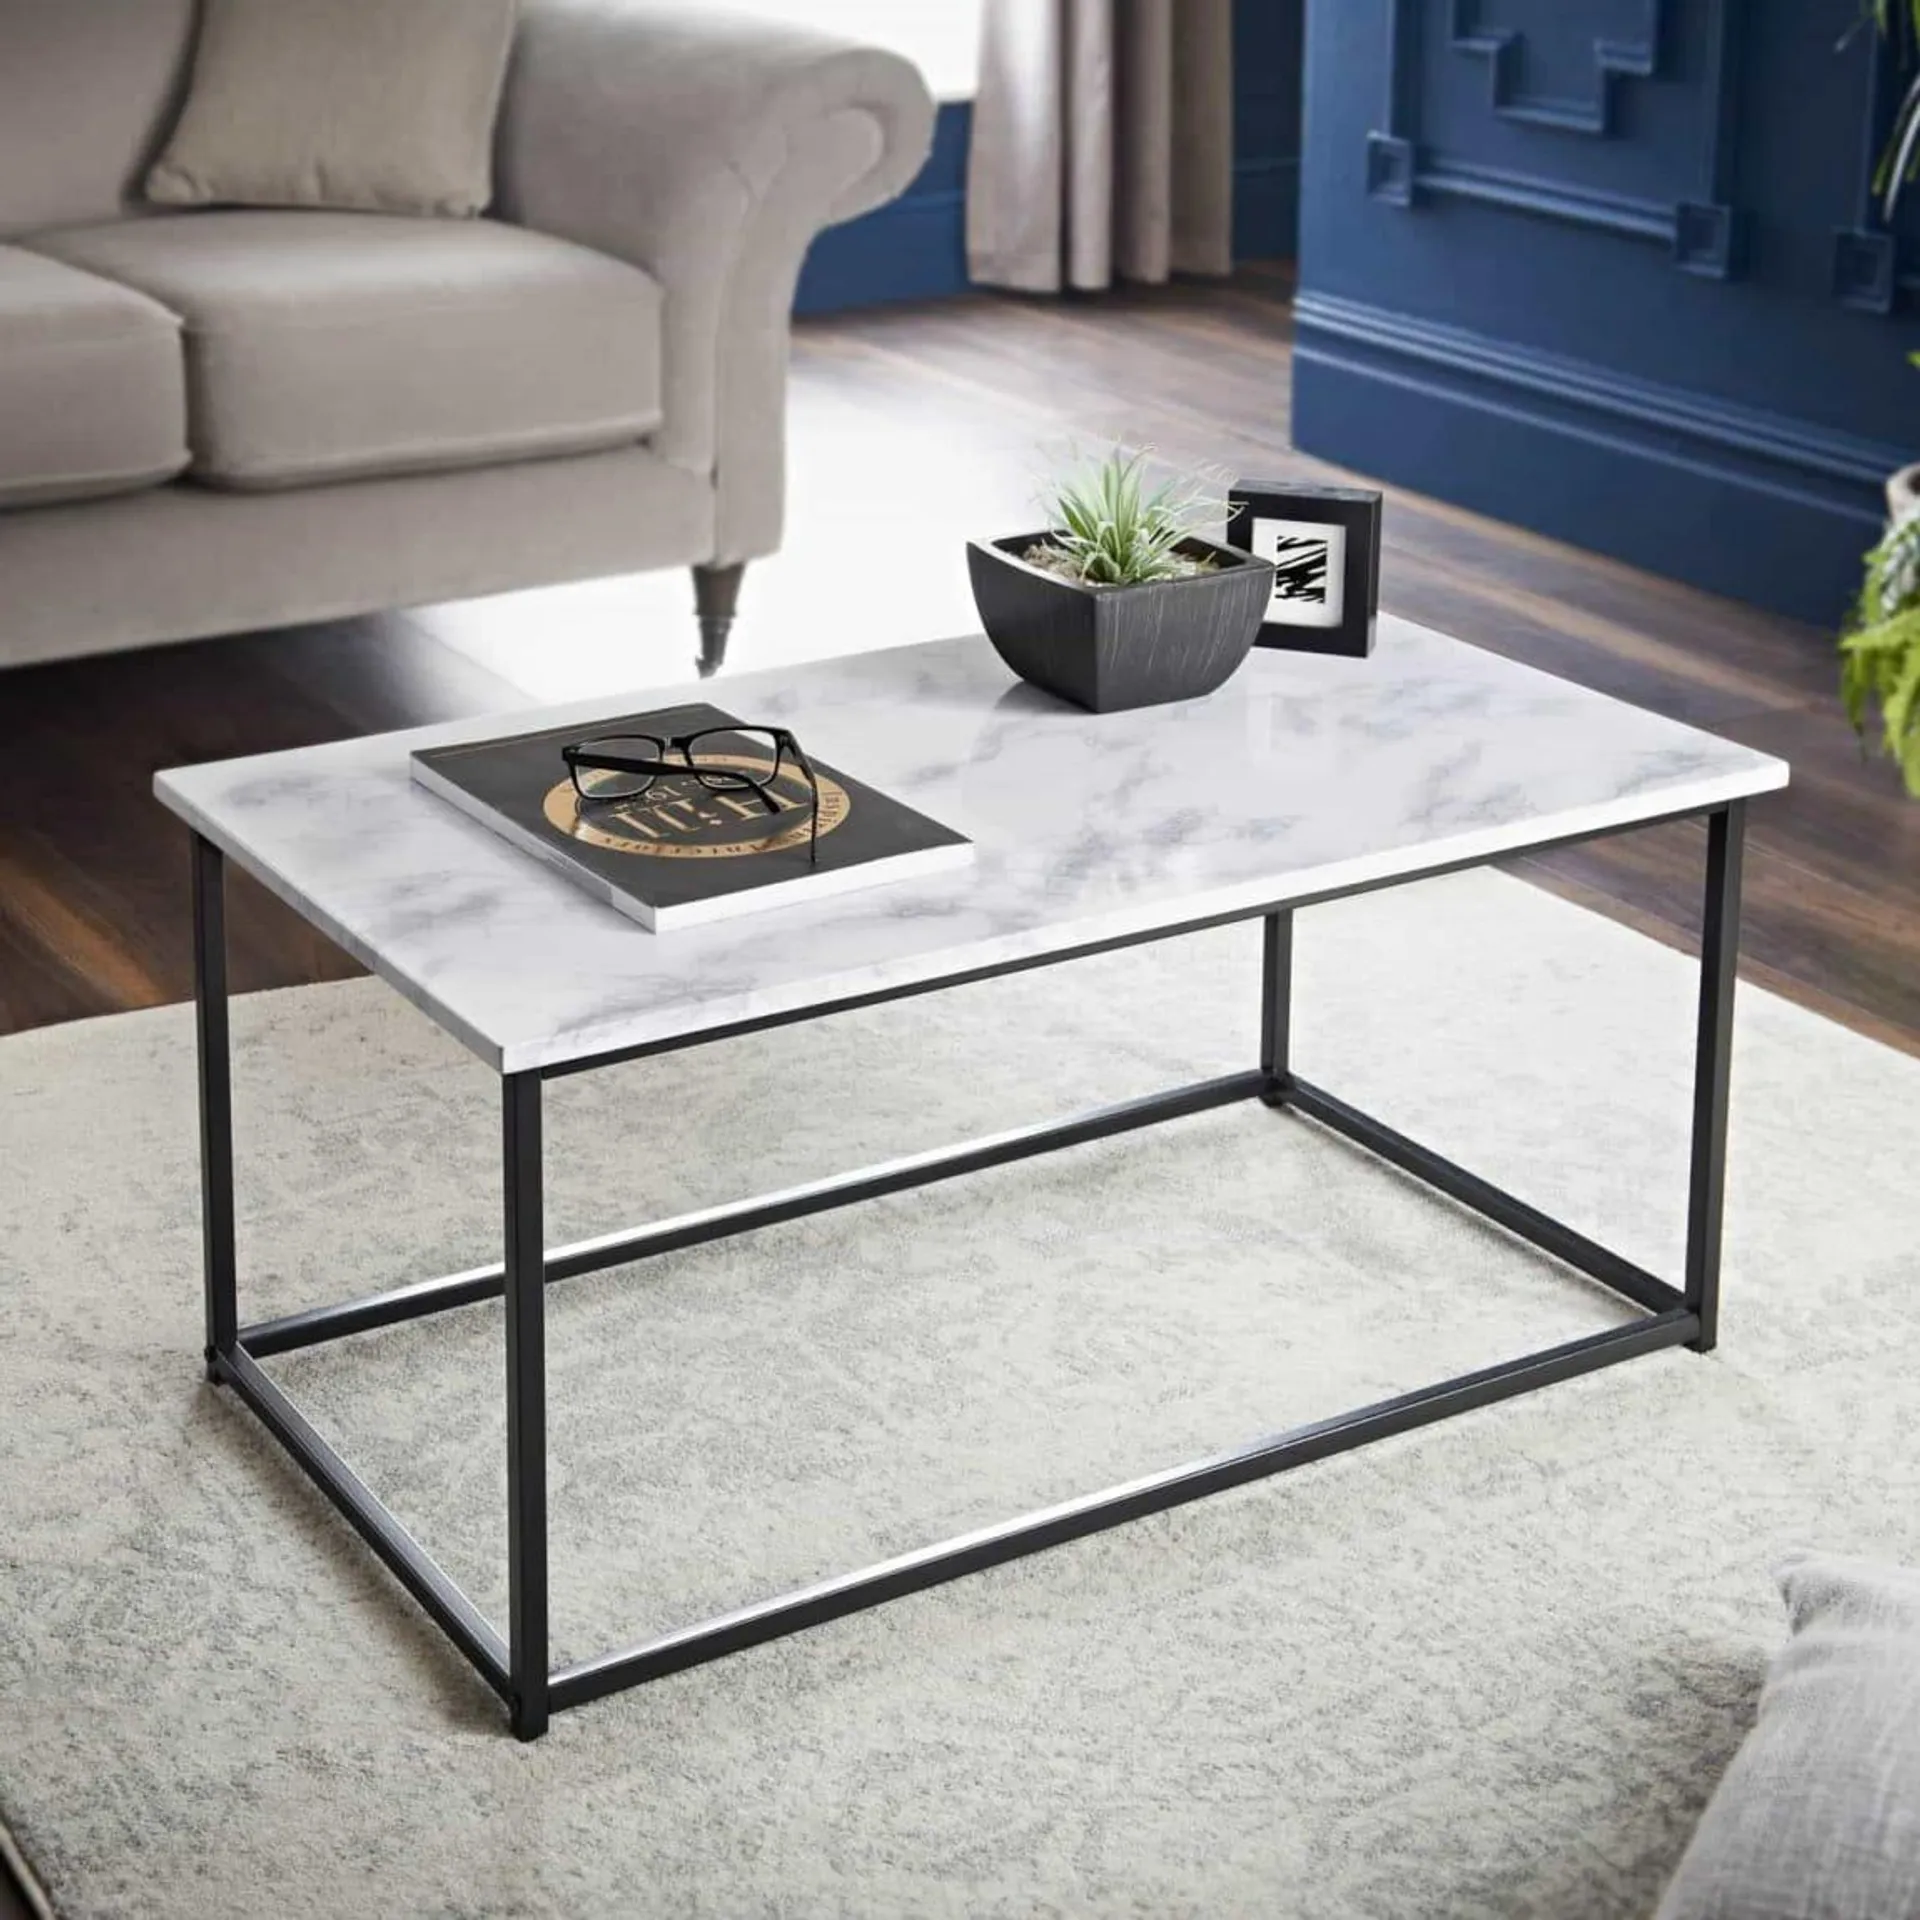 Zurich Marble Finish Coffee Table